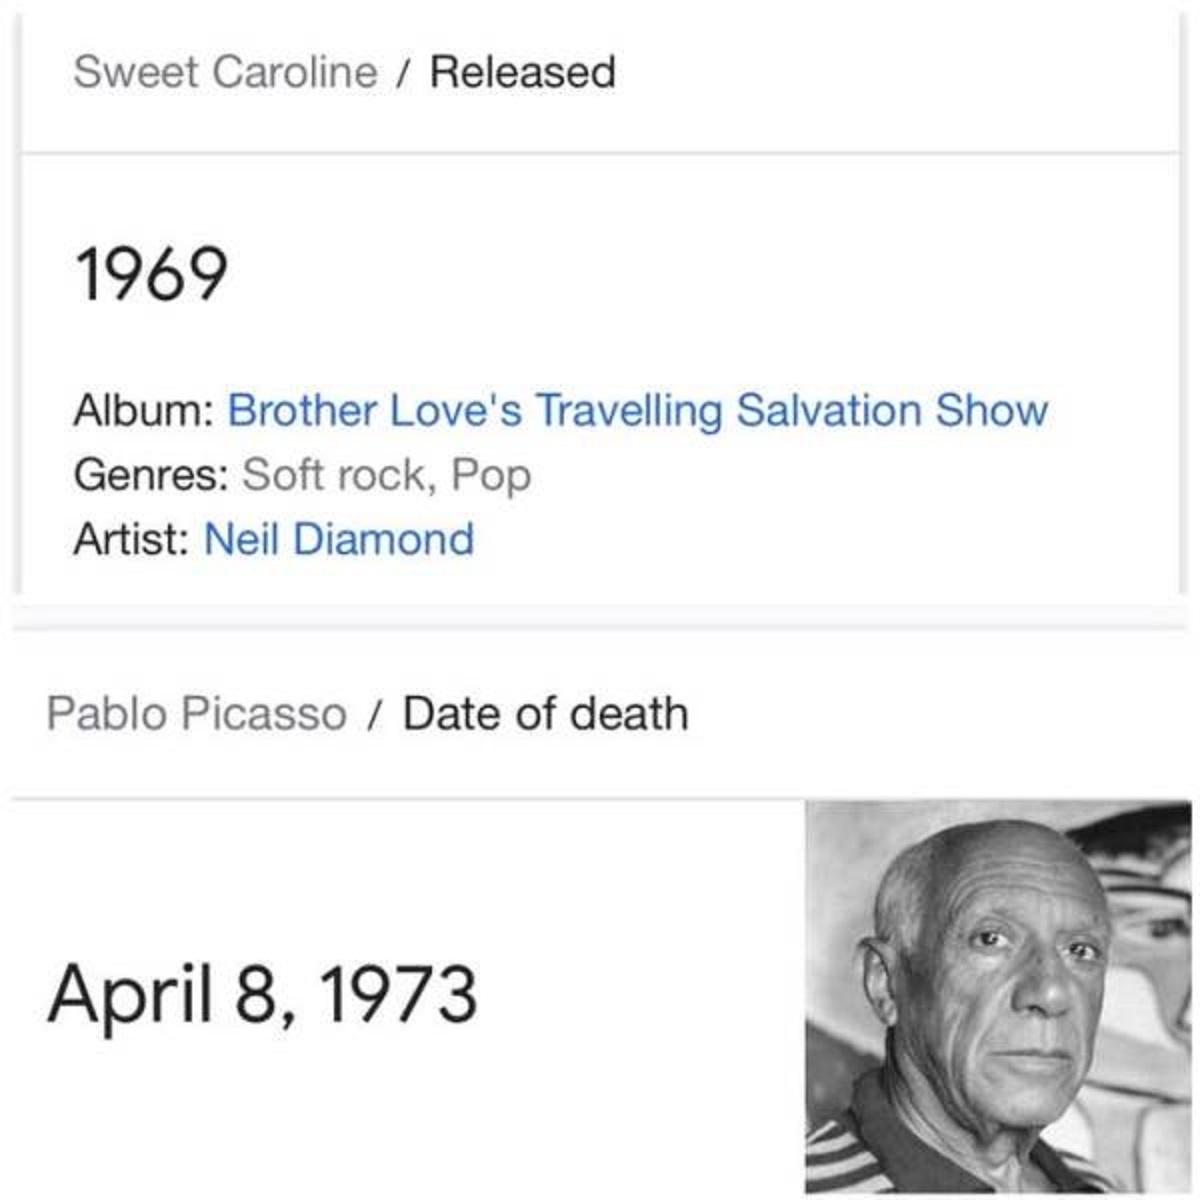 There is a very real chance that Pablo Picasso listened to the song "Sweet Caroline":